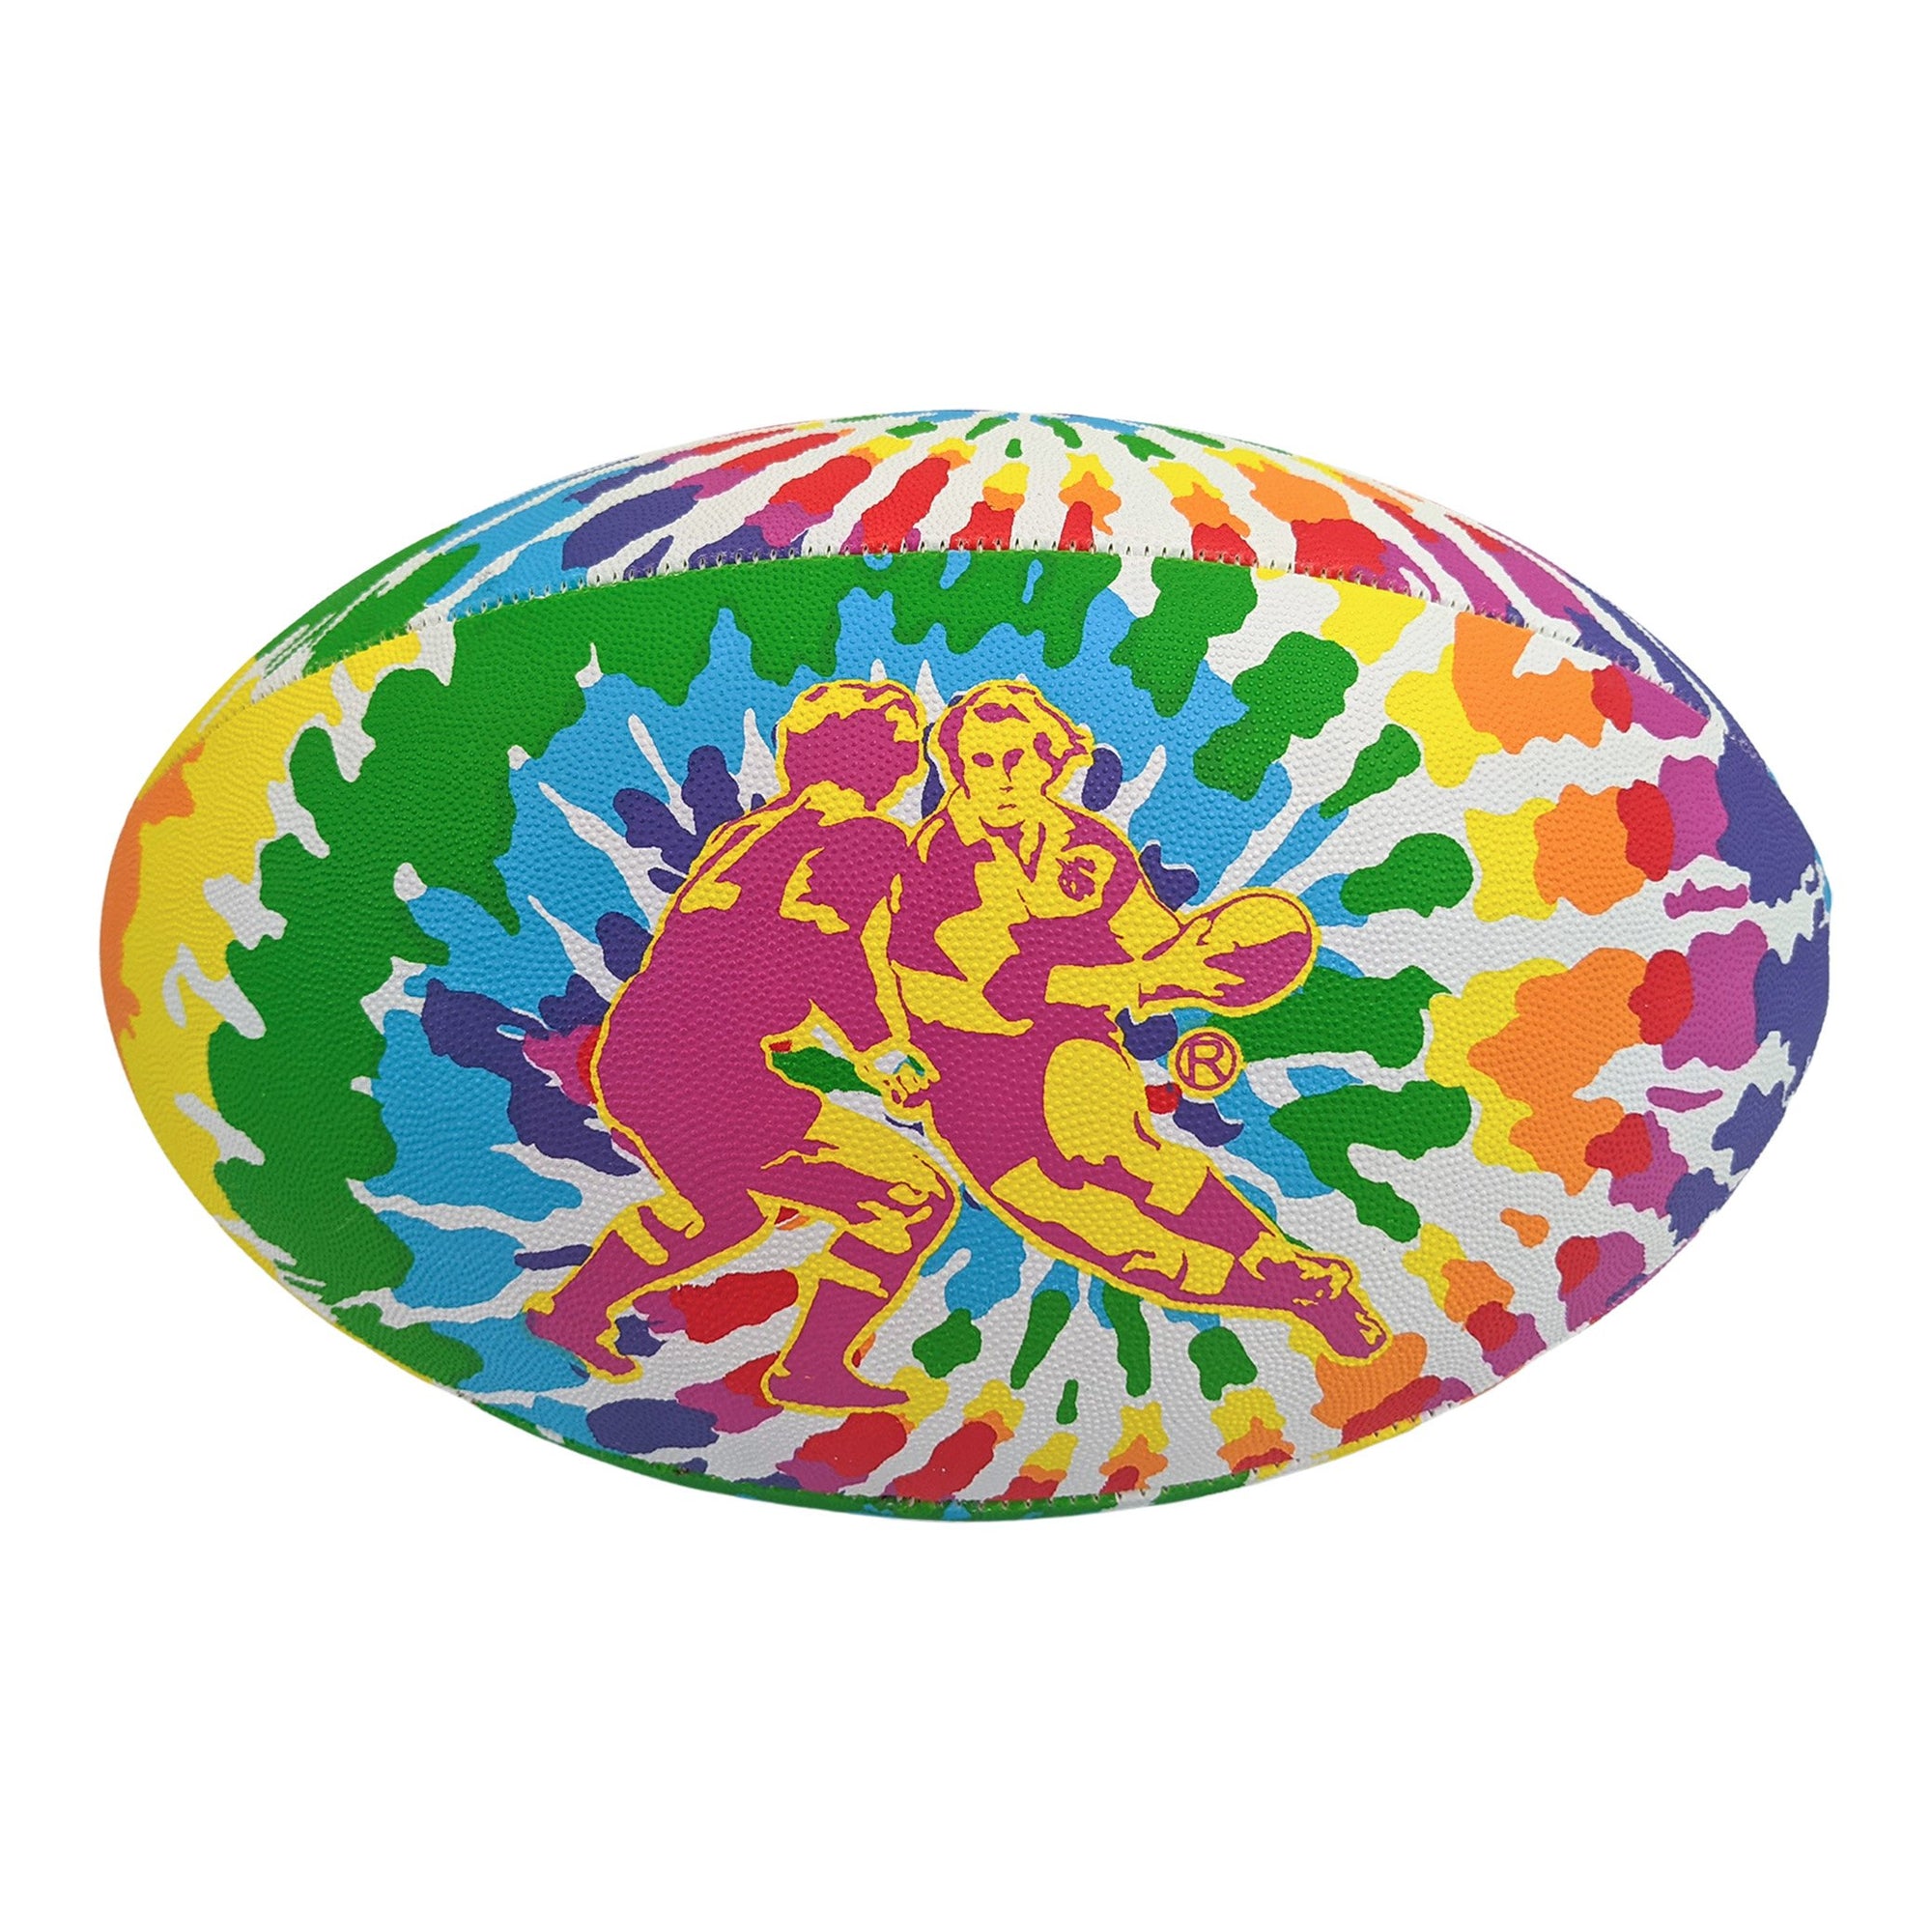 Rugby Imports Gilbert Tie Dye Rugby Ball